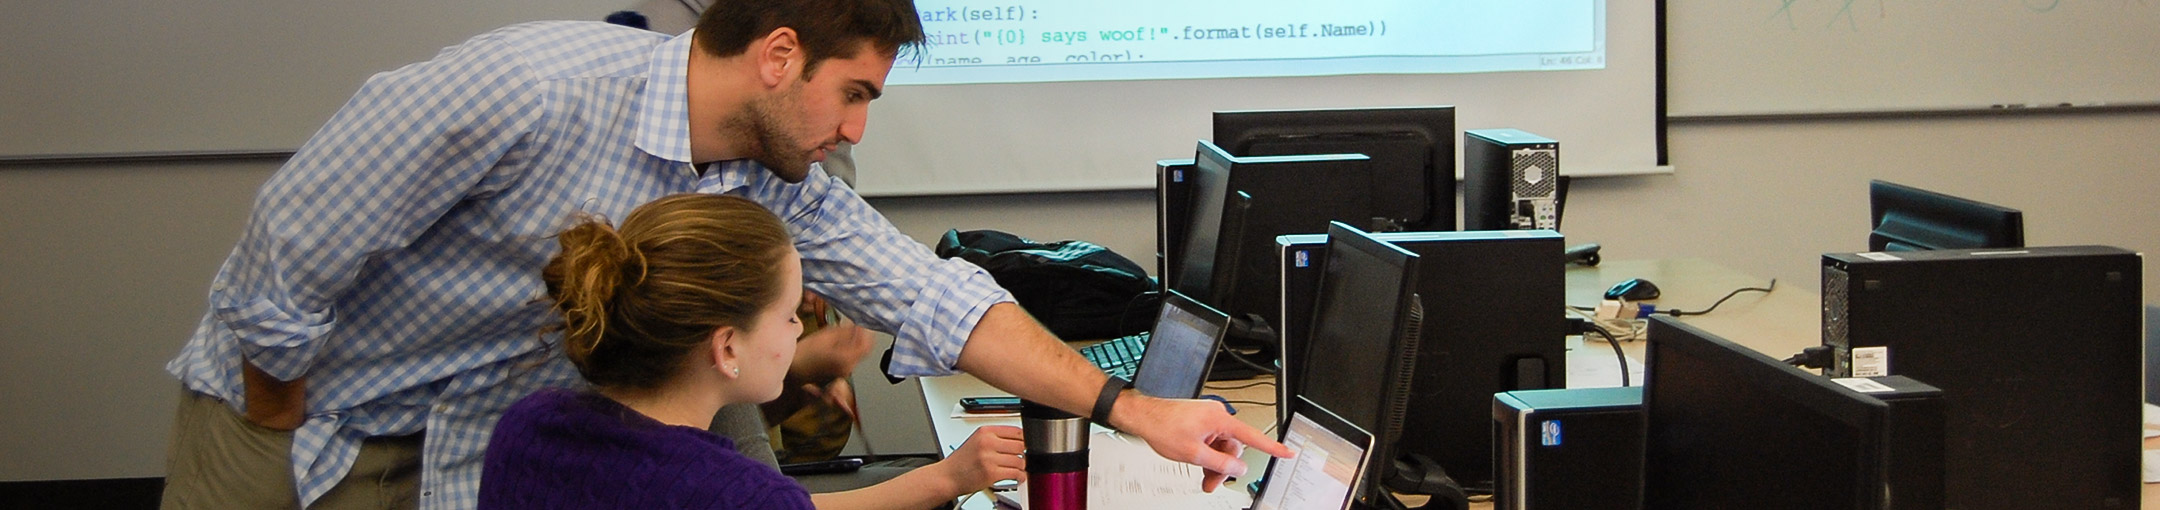 Person helping a student on a computer.